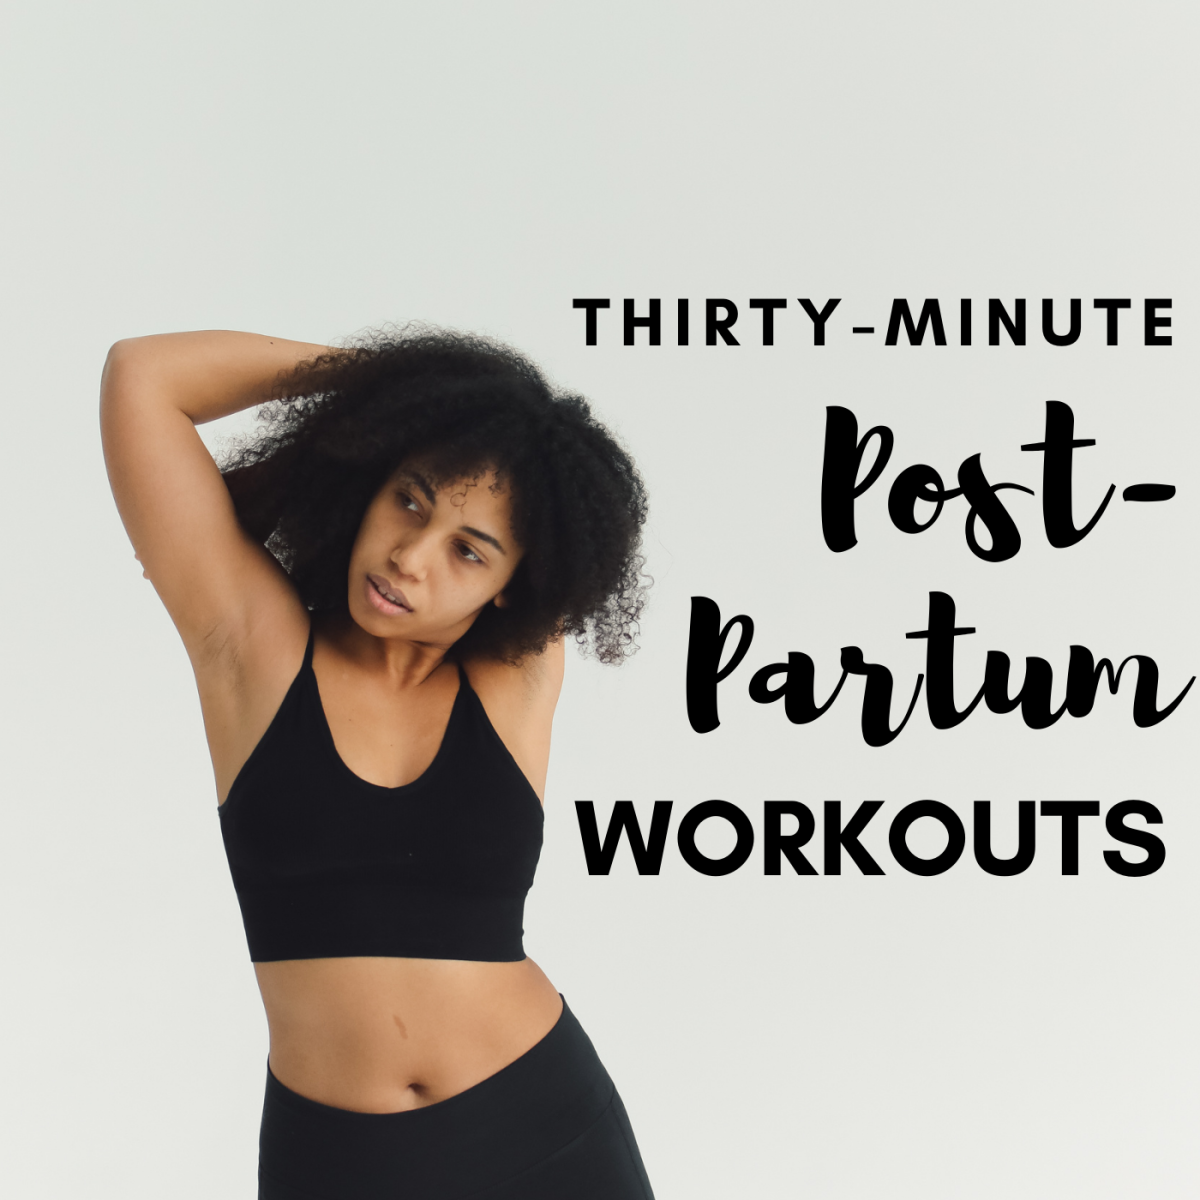 Working out can be hard, especially after having a baby. Here are some methods to make exercising easy.